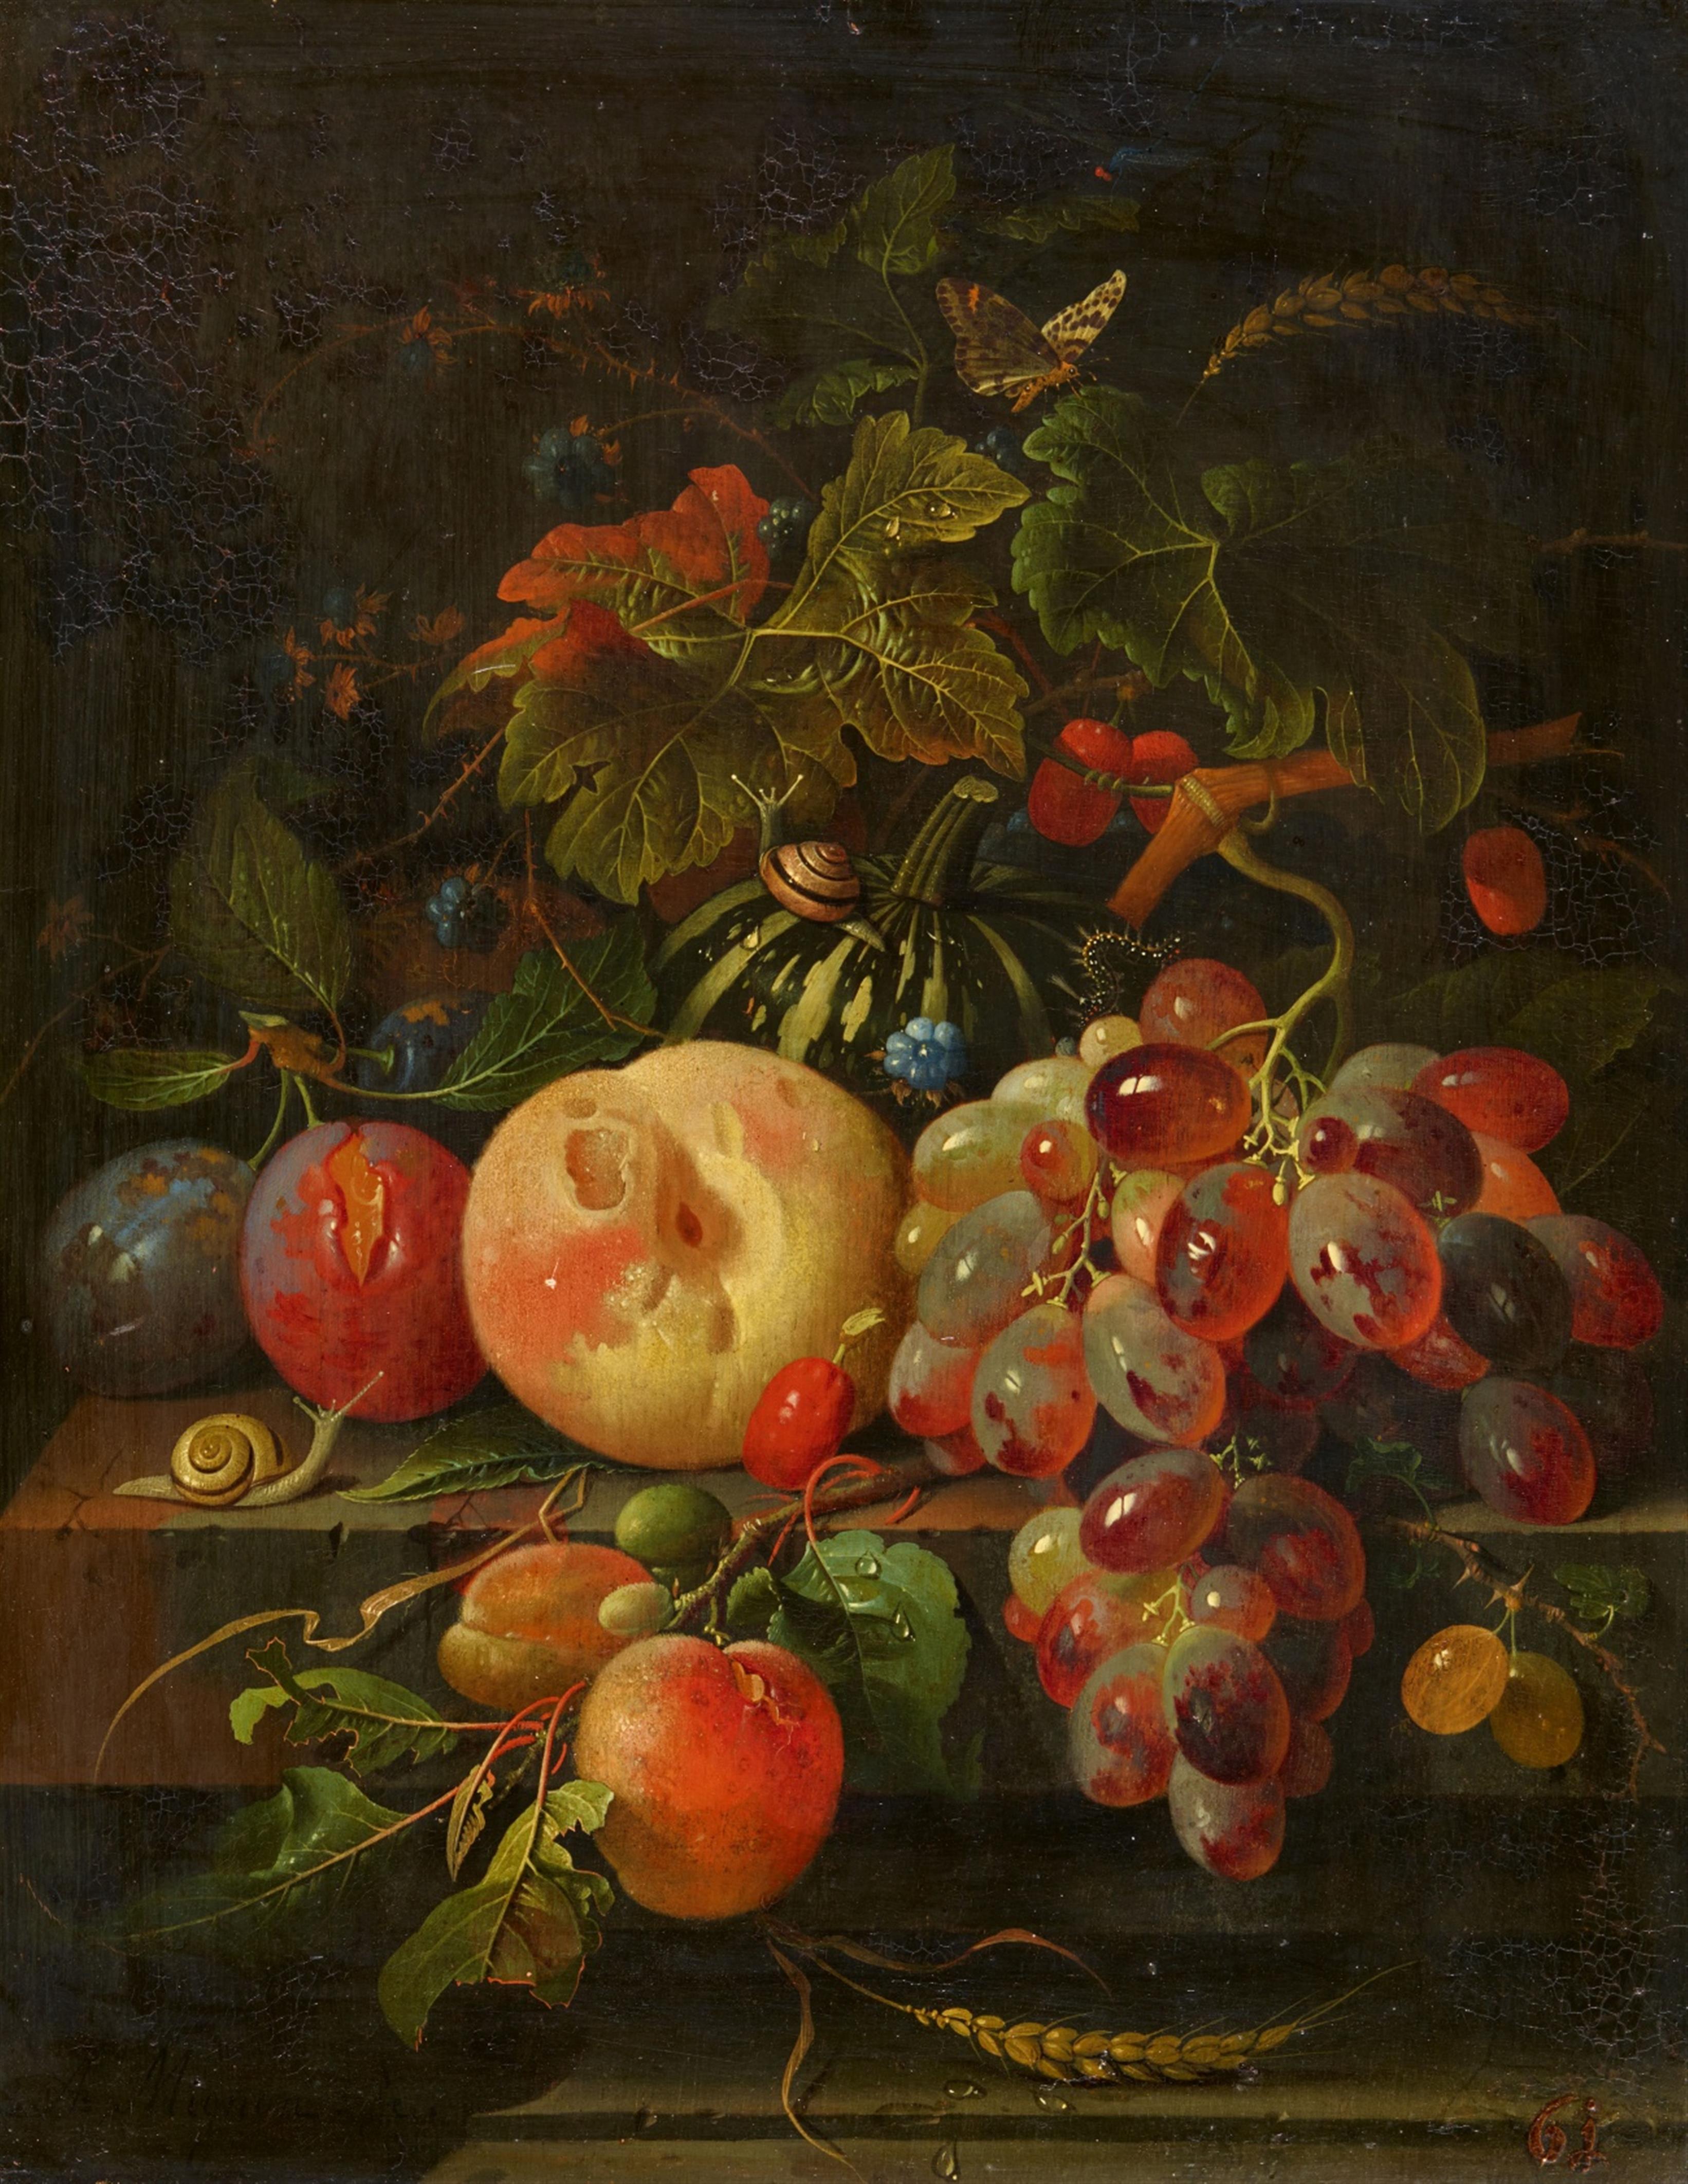 Abraham Mignon - Still Life with a Pumpkin, Peach, Damsens, Grapes, and Insects - image-1